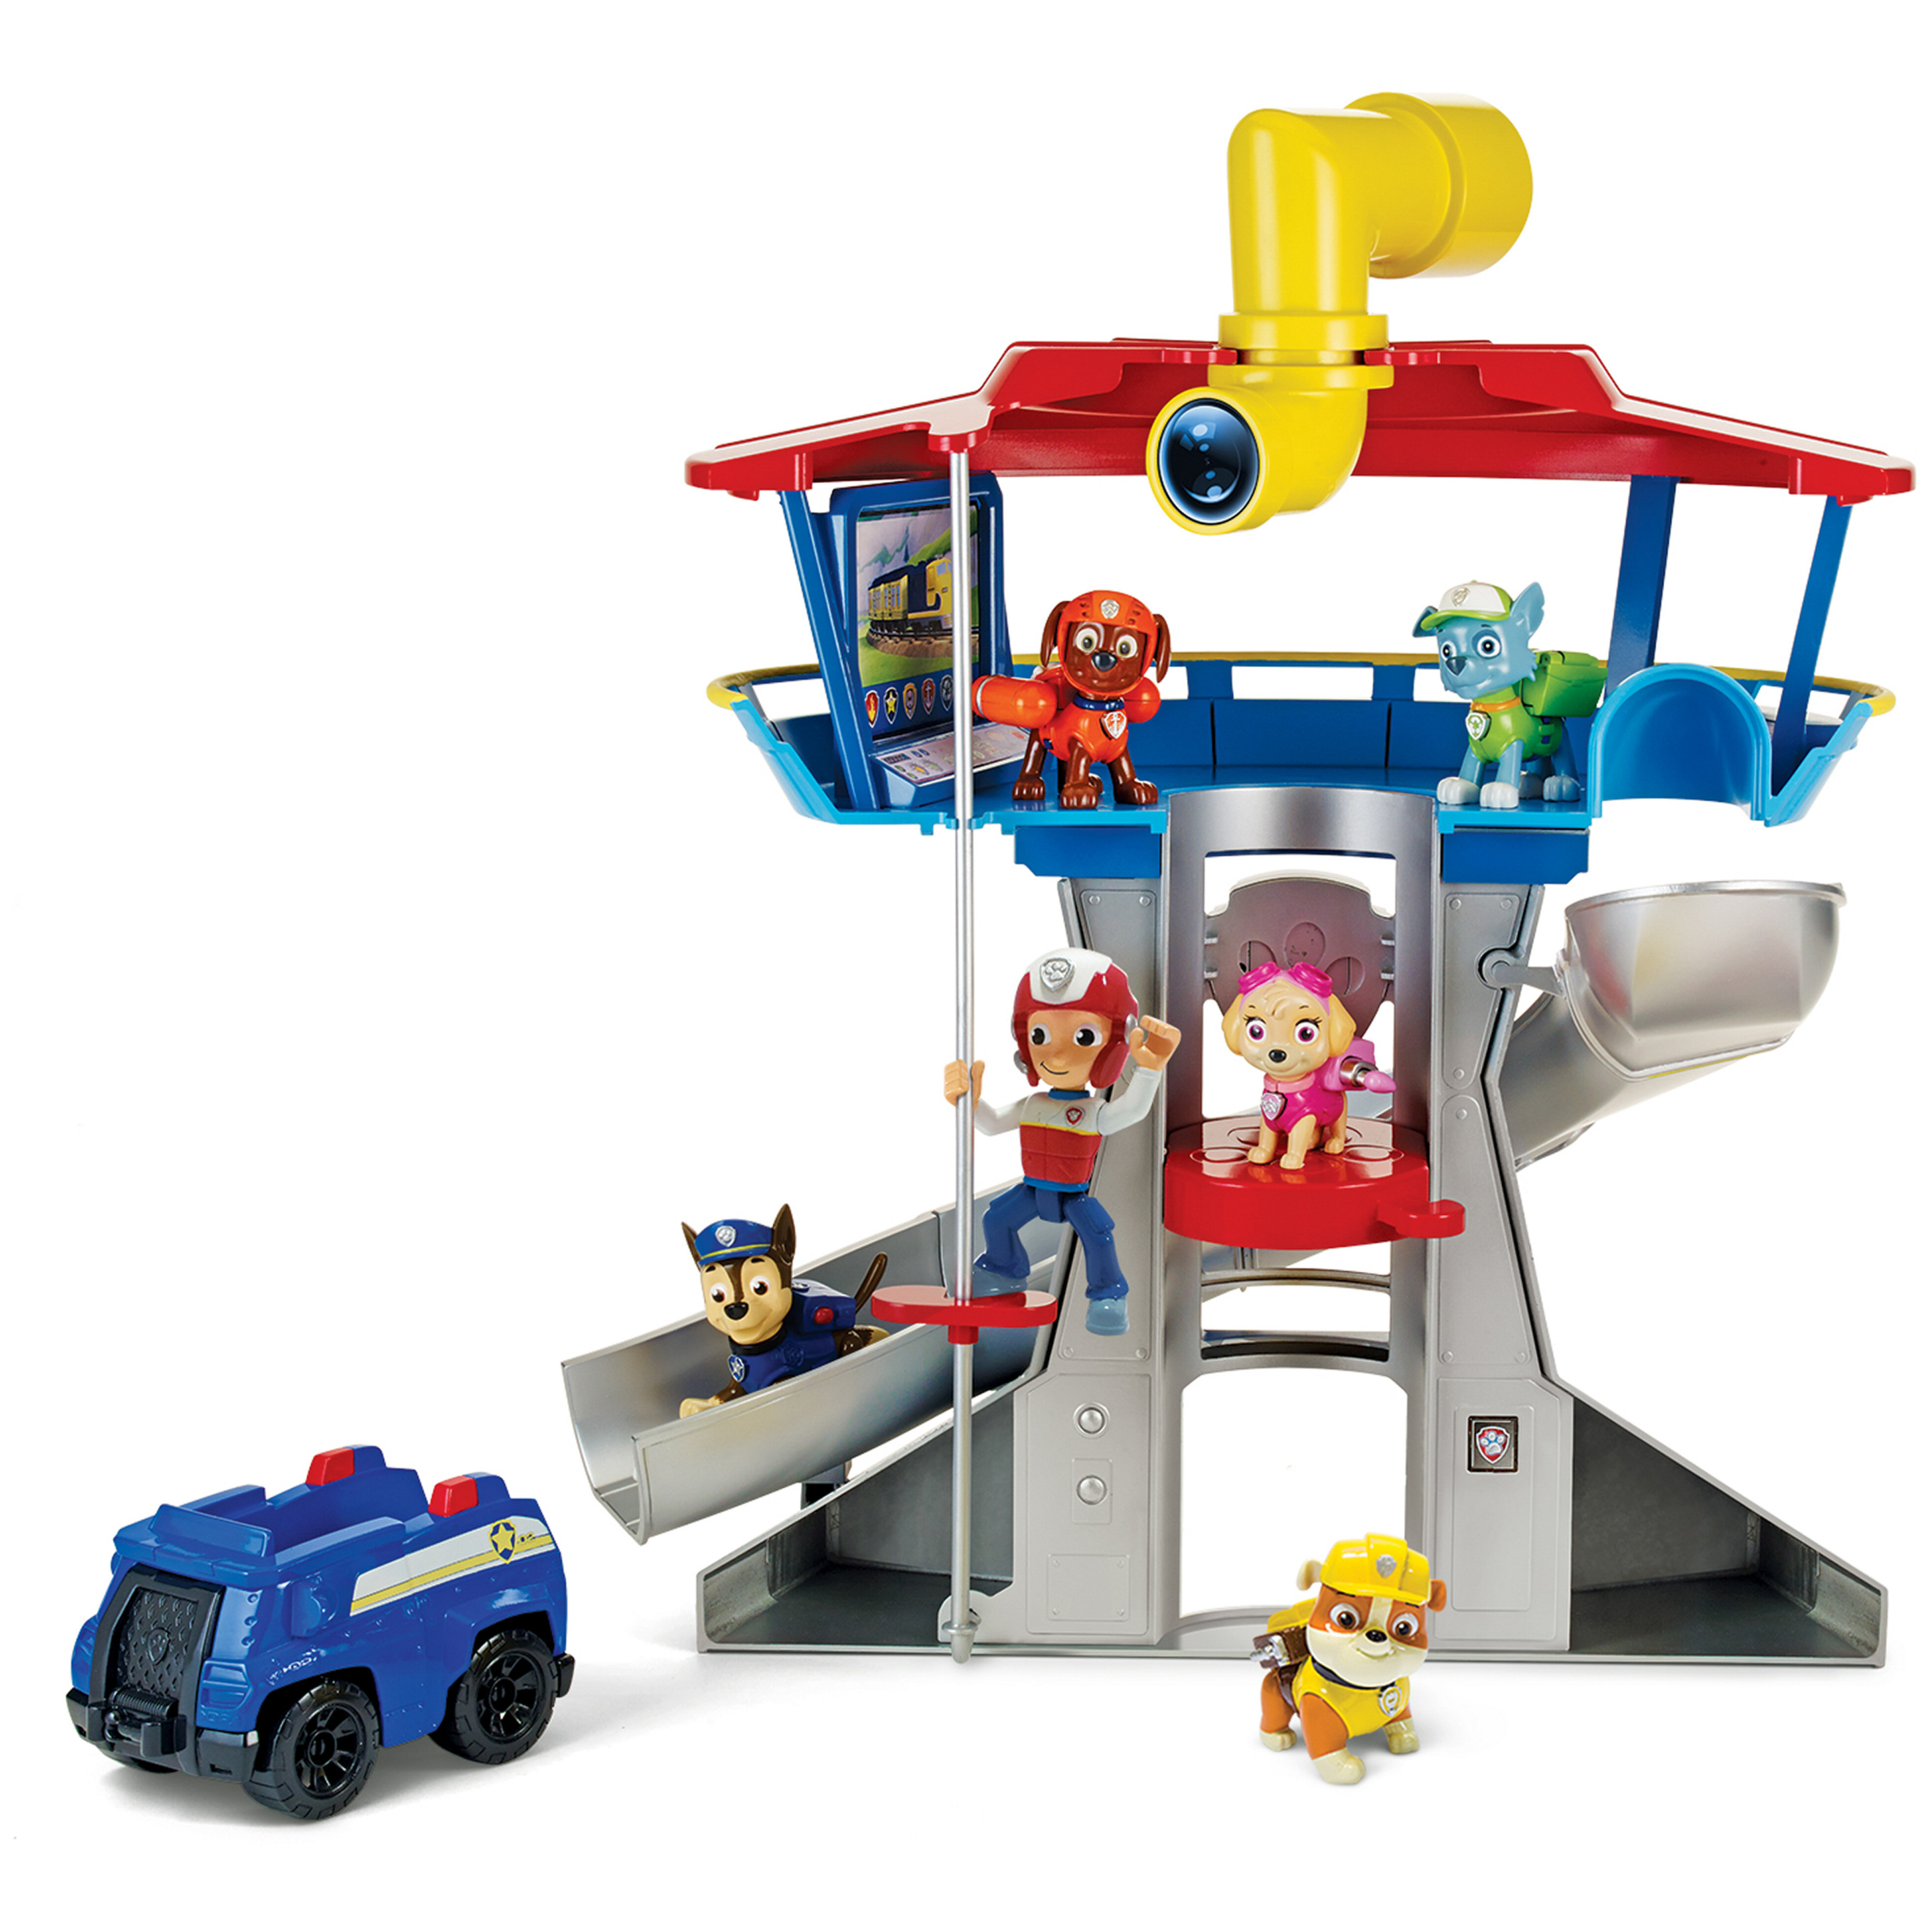 Paw Patrol Look-out Playset, Vehicle and Figure - image 3 of 6